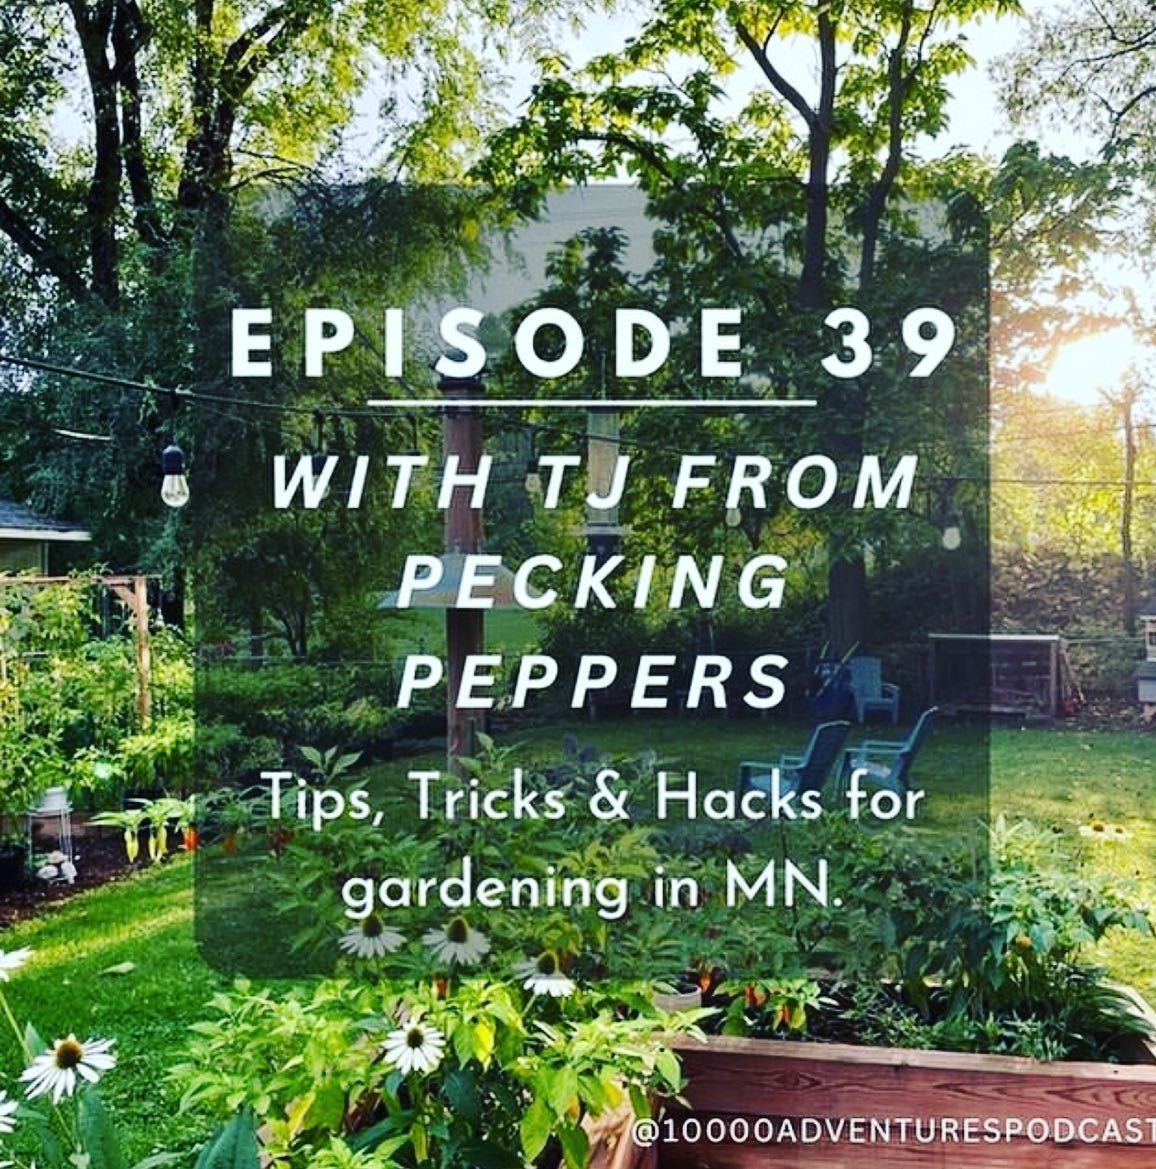 Was proud to be apart of the @10000adventurespodcast this past week to talk about gardening. Great perspective on what&rsquo;s happening now in the Twin Cities and how you can find your next Minnesota Adventure! Always hear about something new and I 